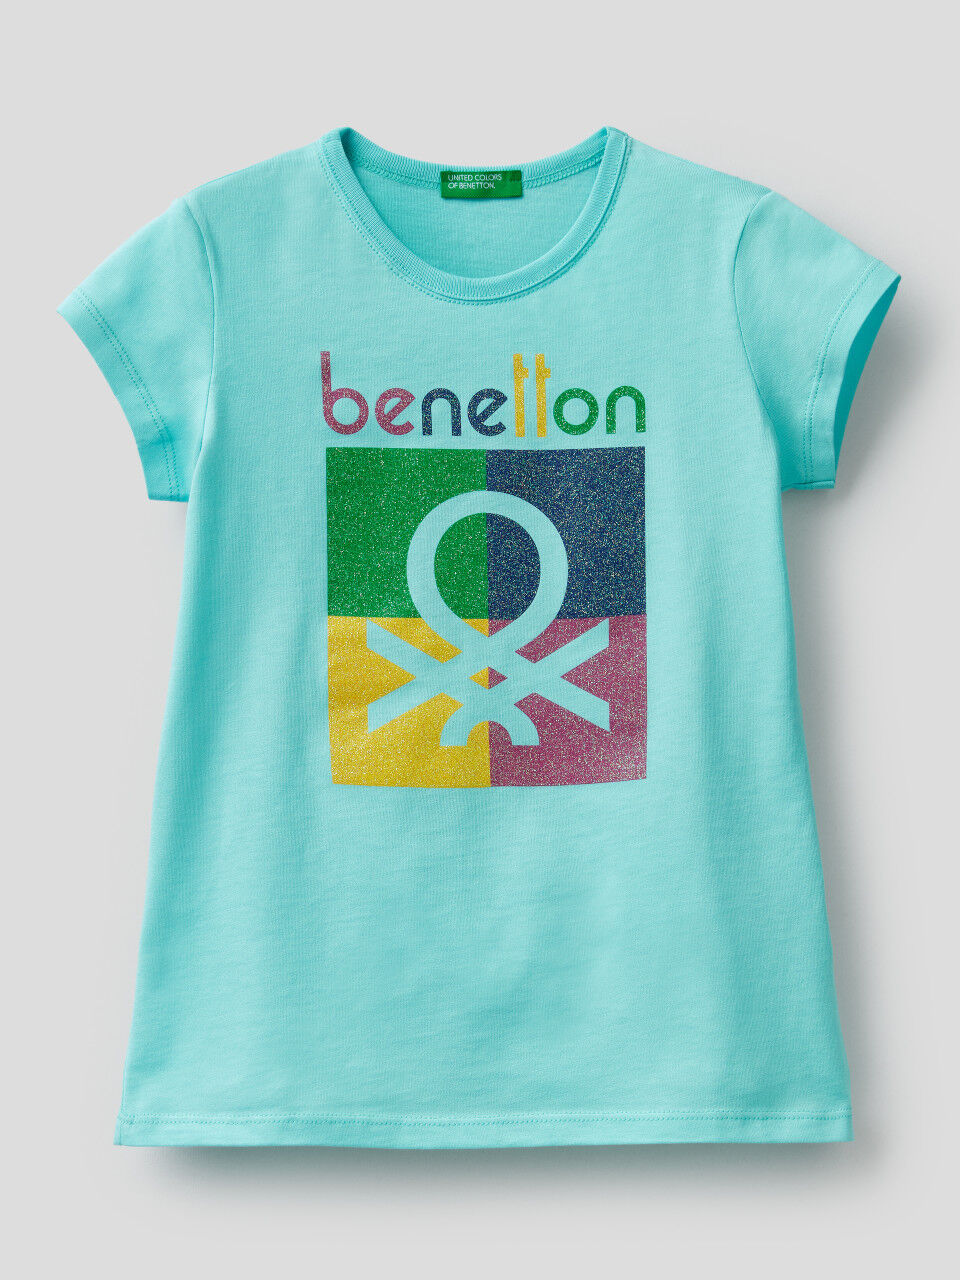 Junior Girls' T-shirts and Shirts Collection 2022 | Benetton